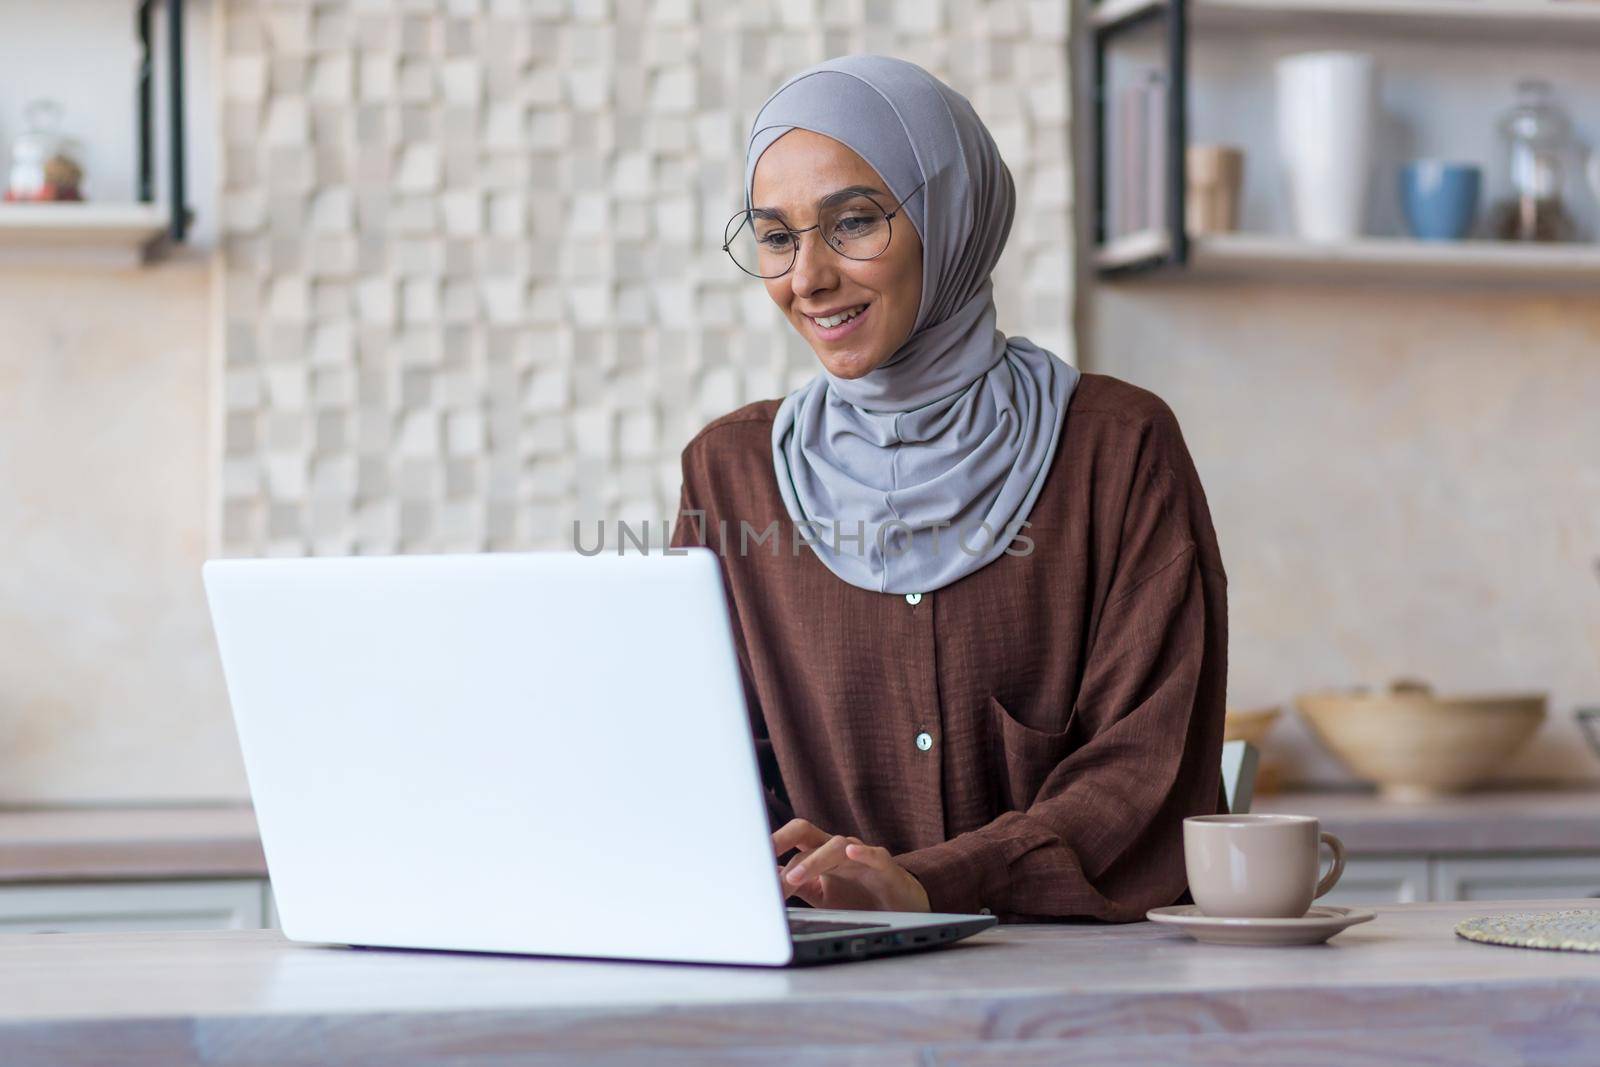 Young beautiful muslim woman in hijab and glasses studying remotely using laptop student woman in kitchen smiling and happy.